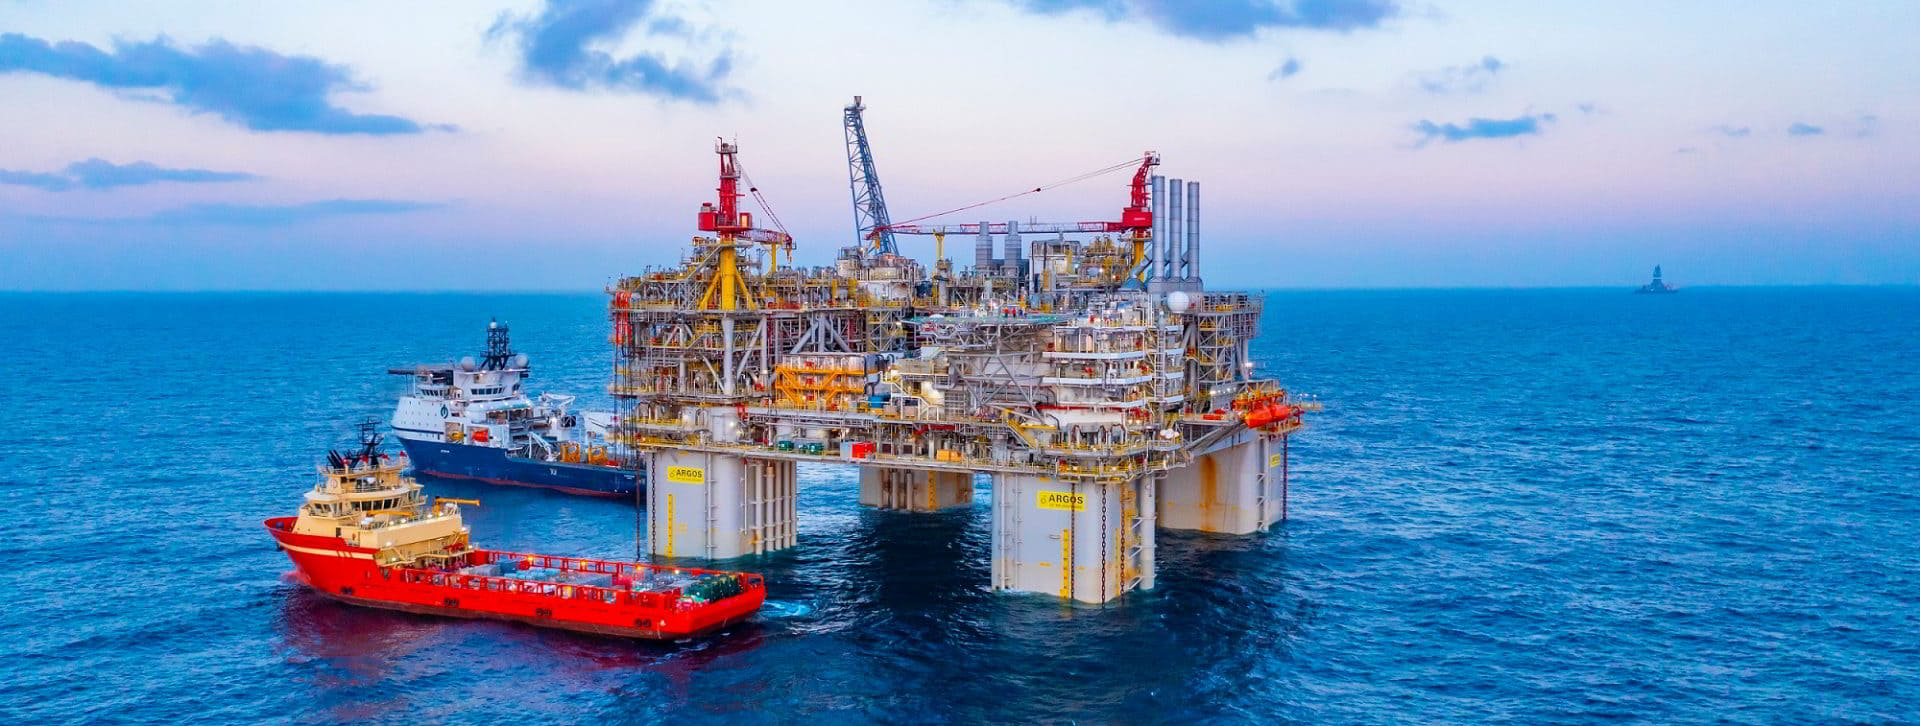 Argos semi-submersible offshore platform in the U.S. Gulf of Mexico; Source: BP